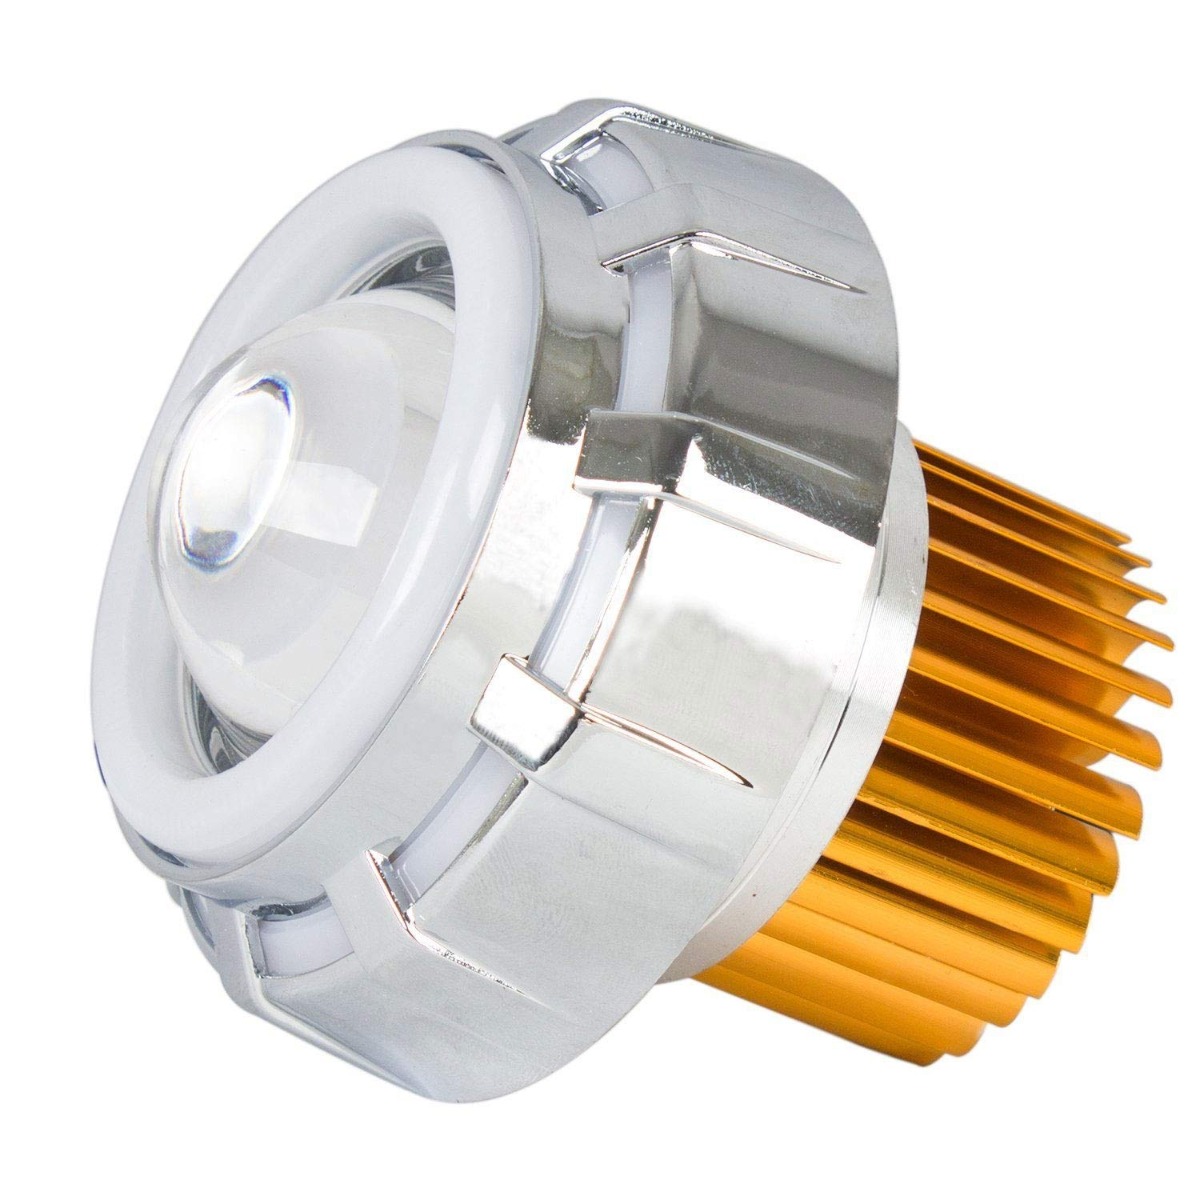 https://www.allextreme.in/media/catalog/product/p/r/projector_lamp_headlight_led.jpg